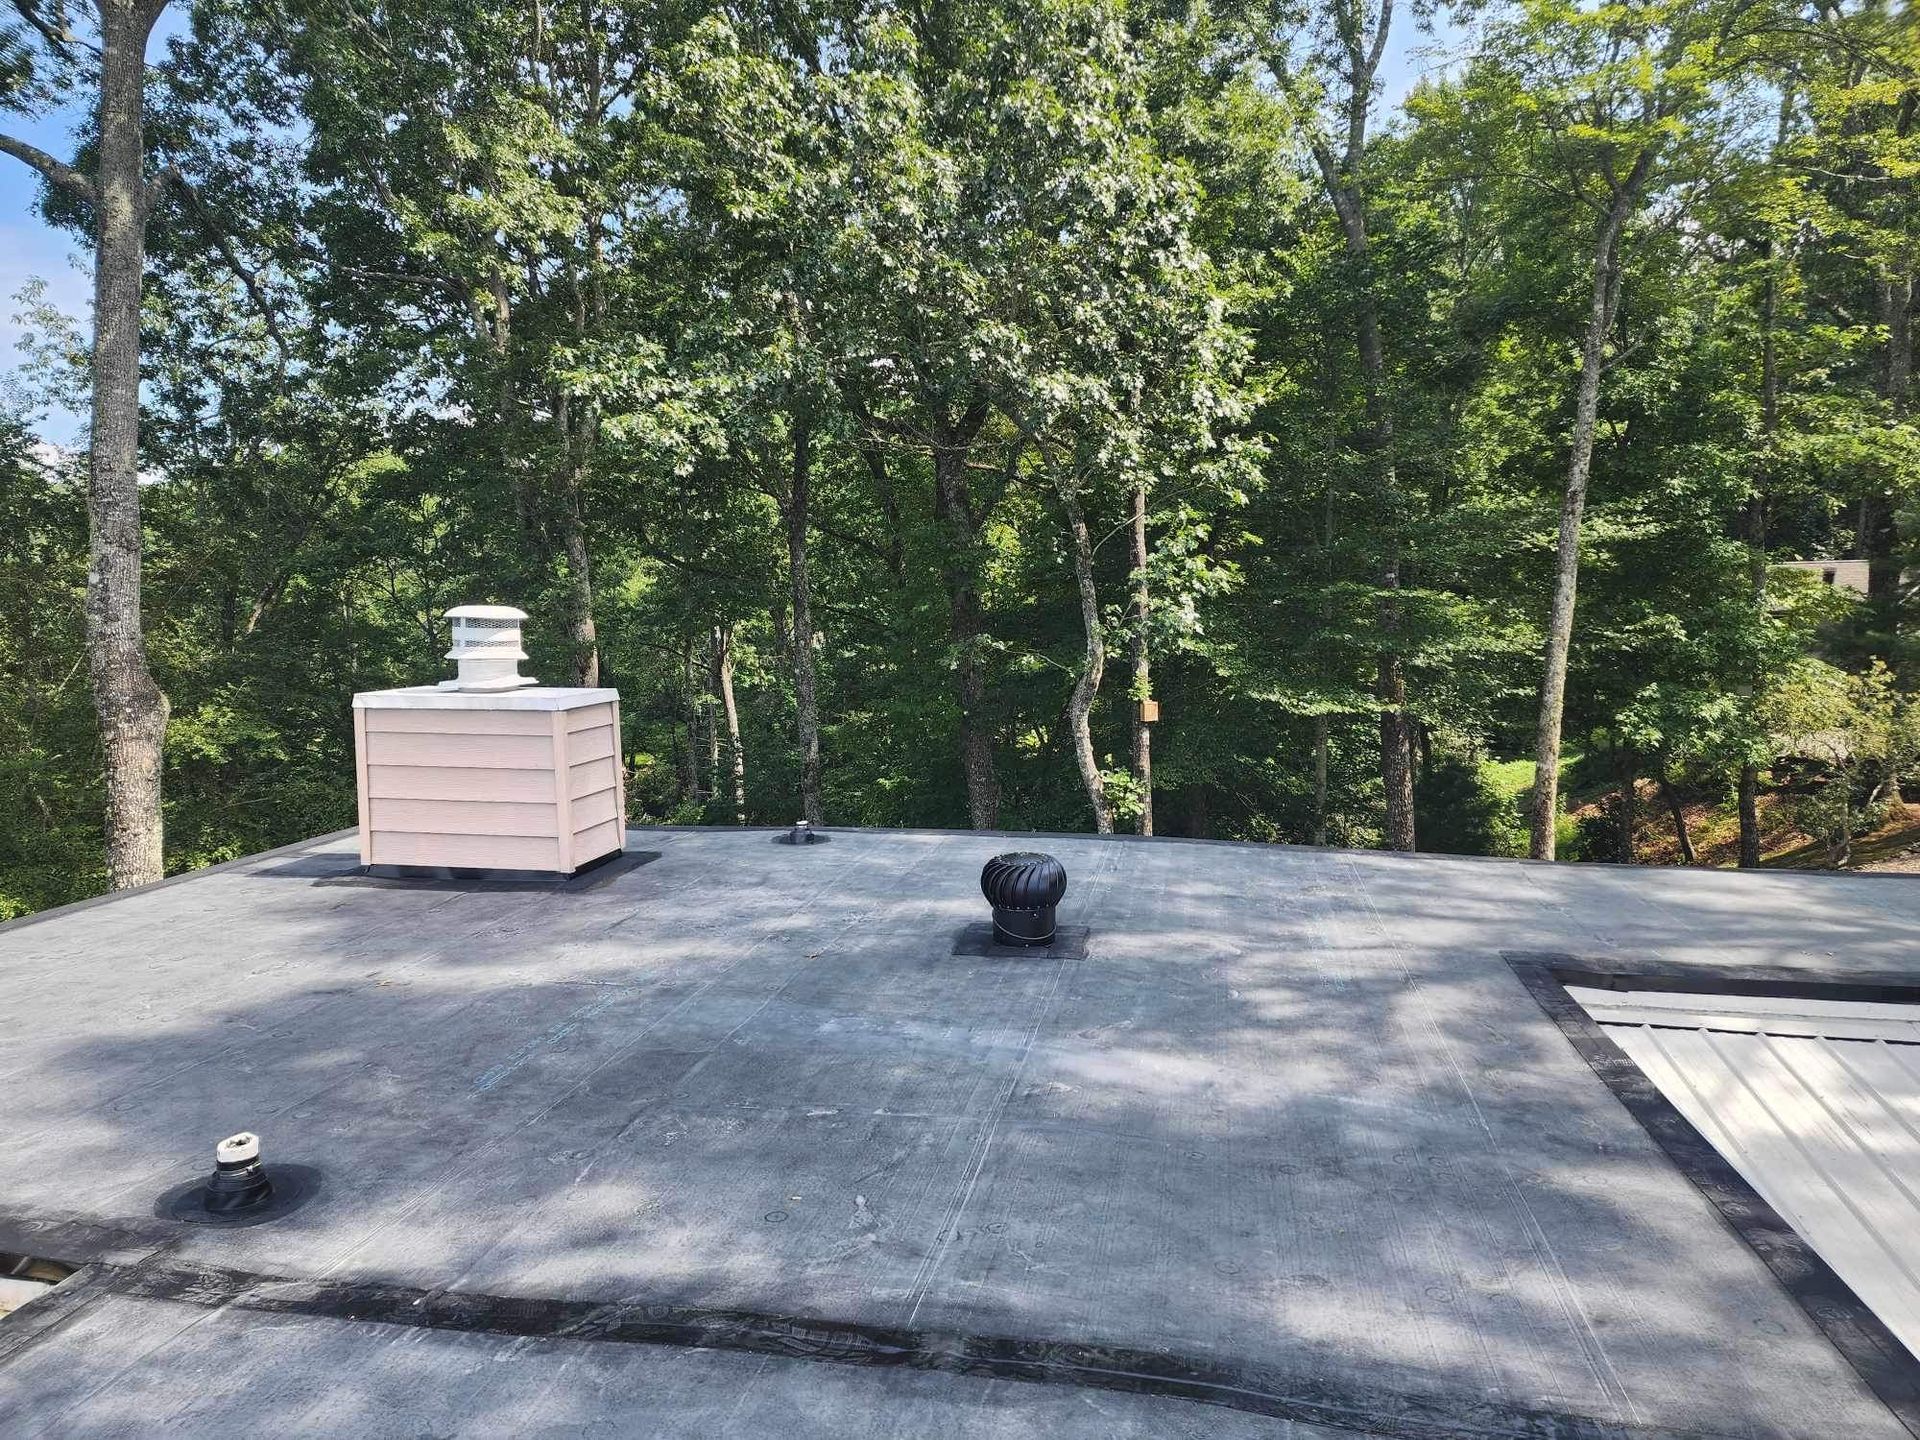 Re-roofing Services Near You